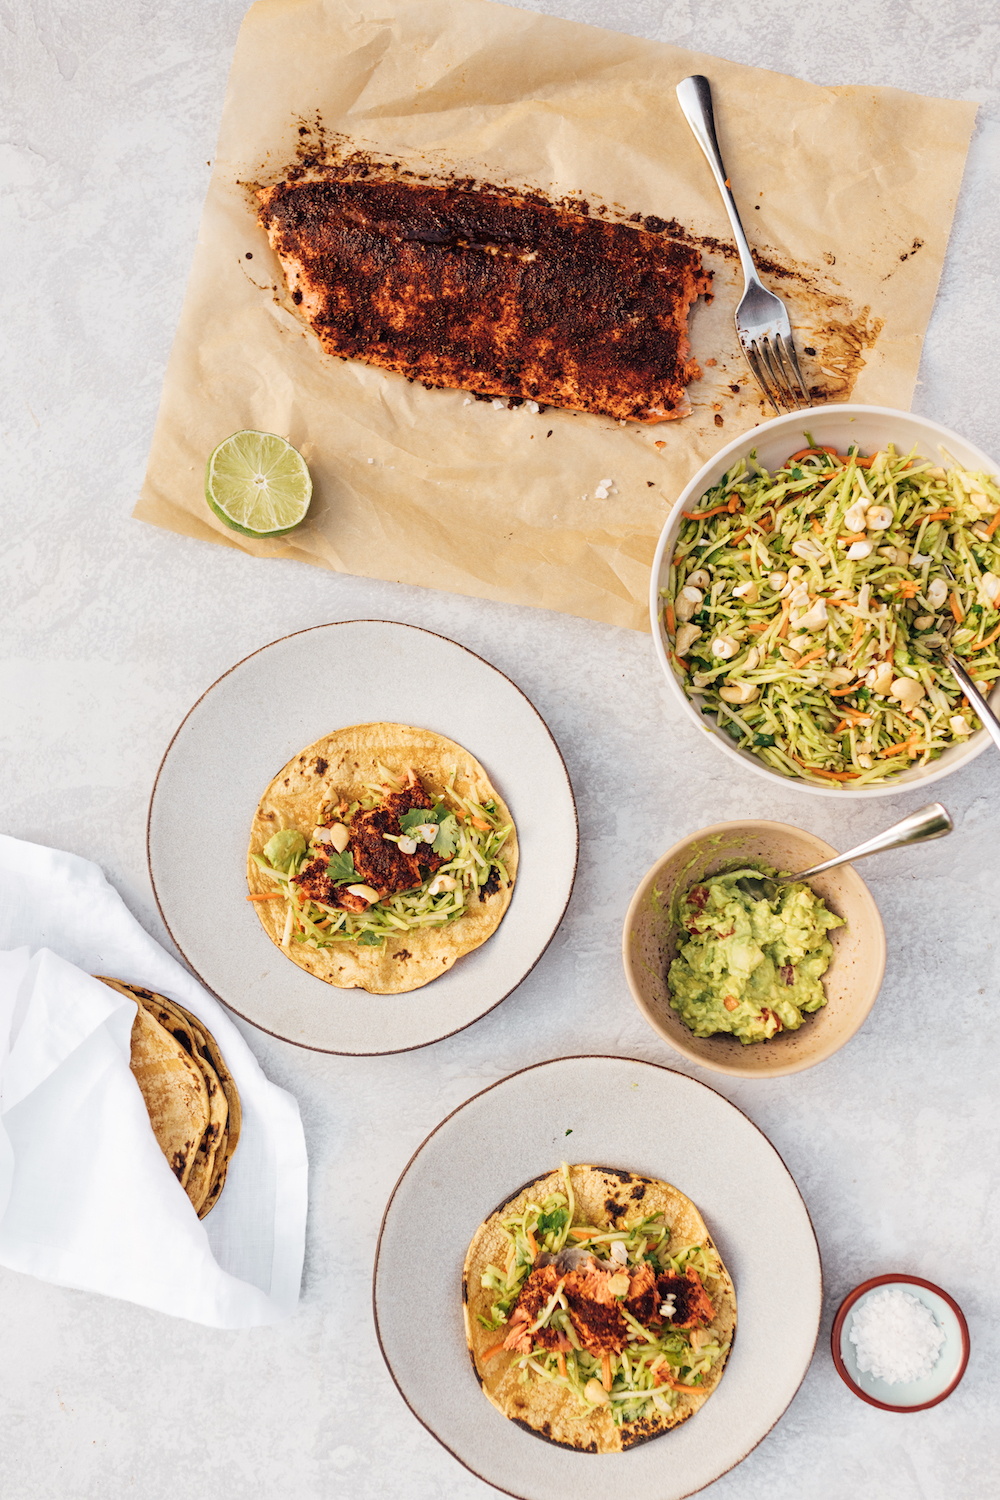 Chili-Rubbed Salmon Tacos With Cashew-Broccoli Slaw_best taco recipes